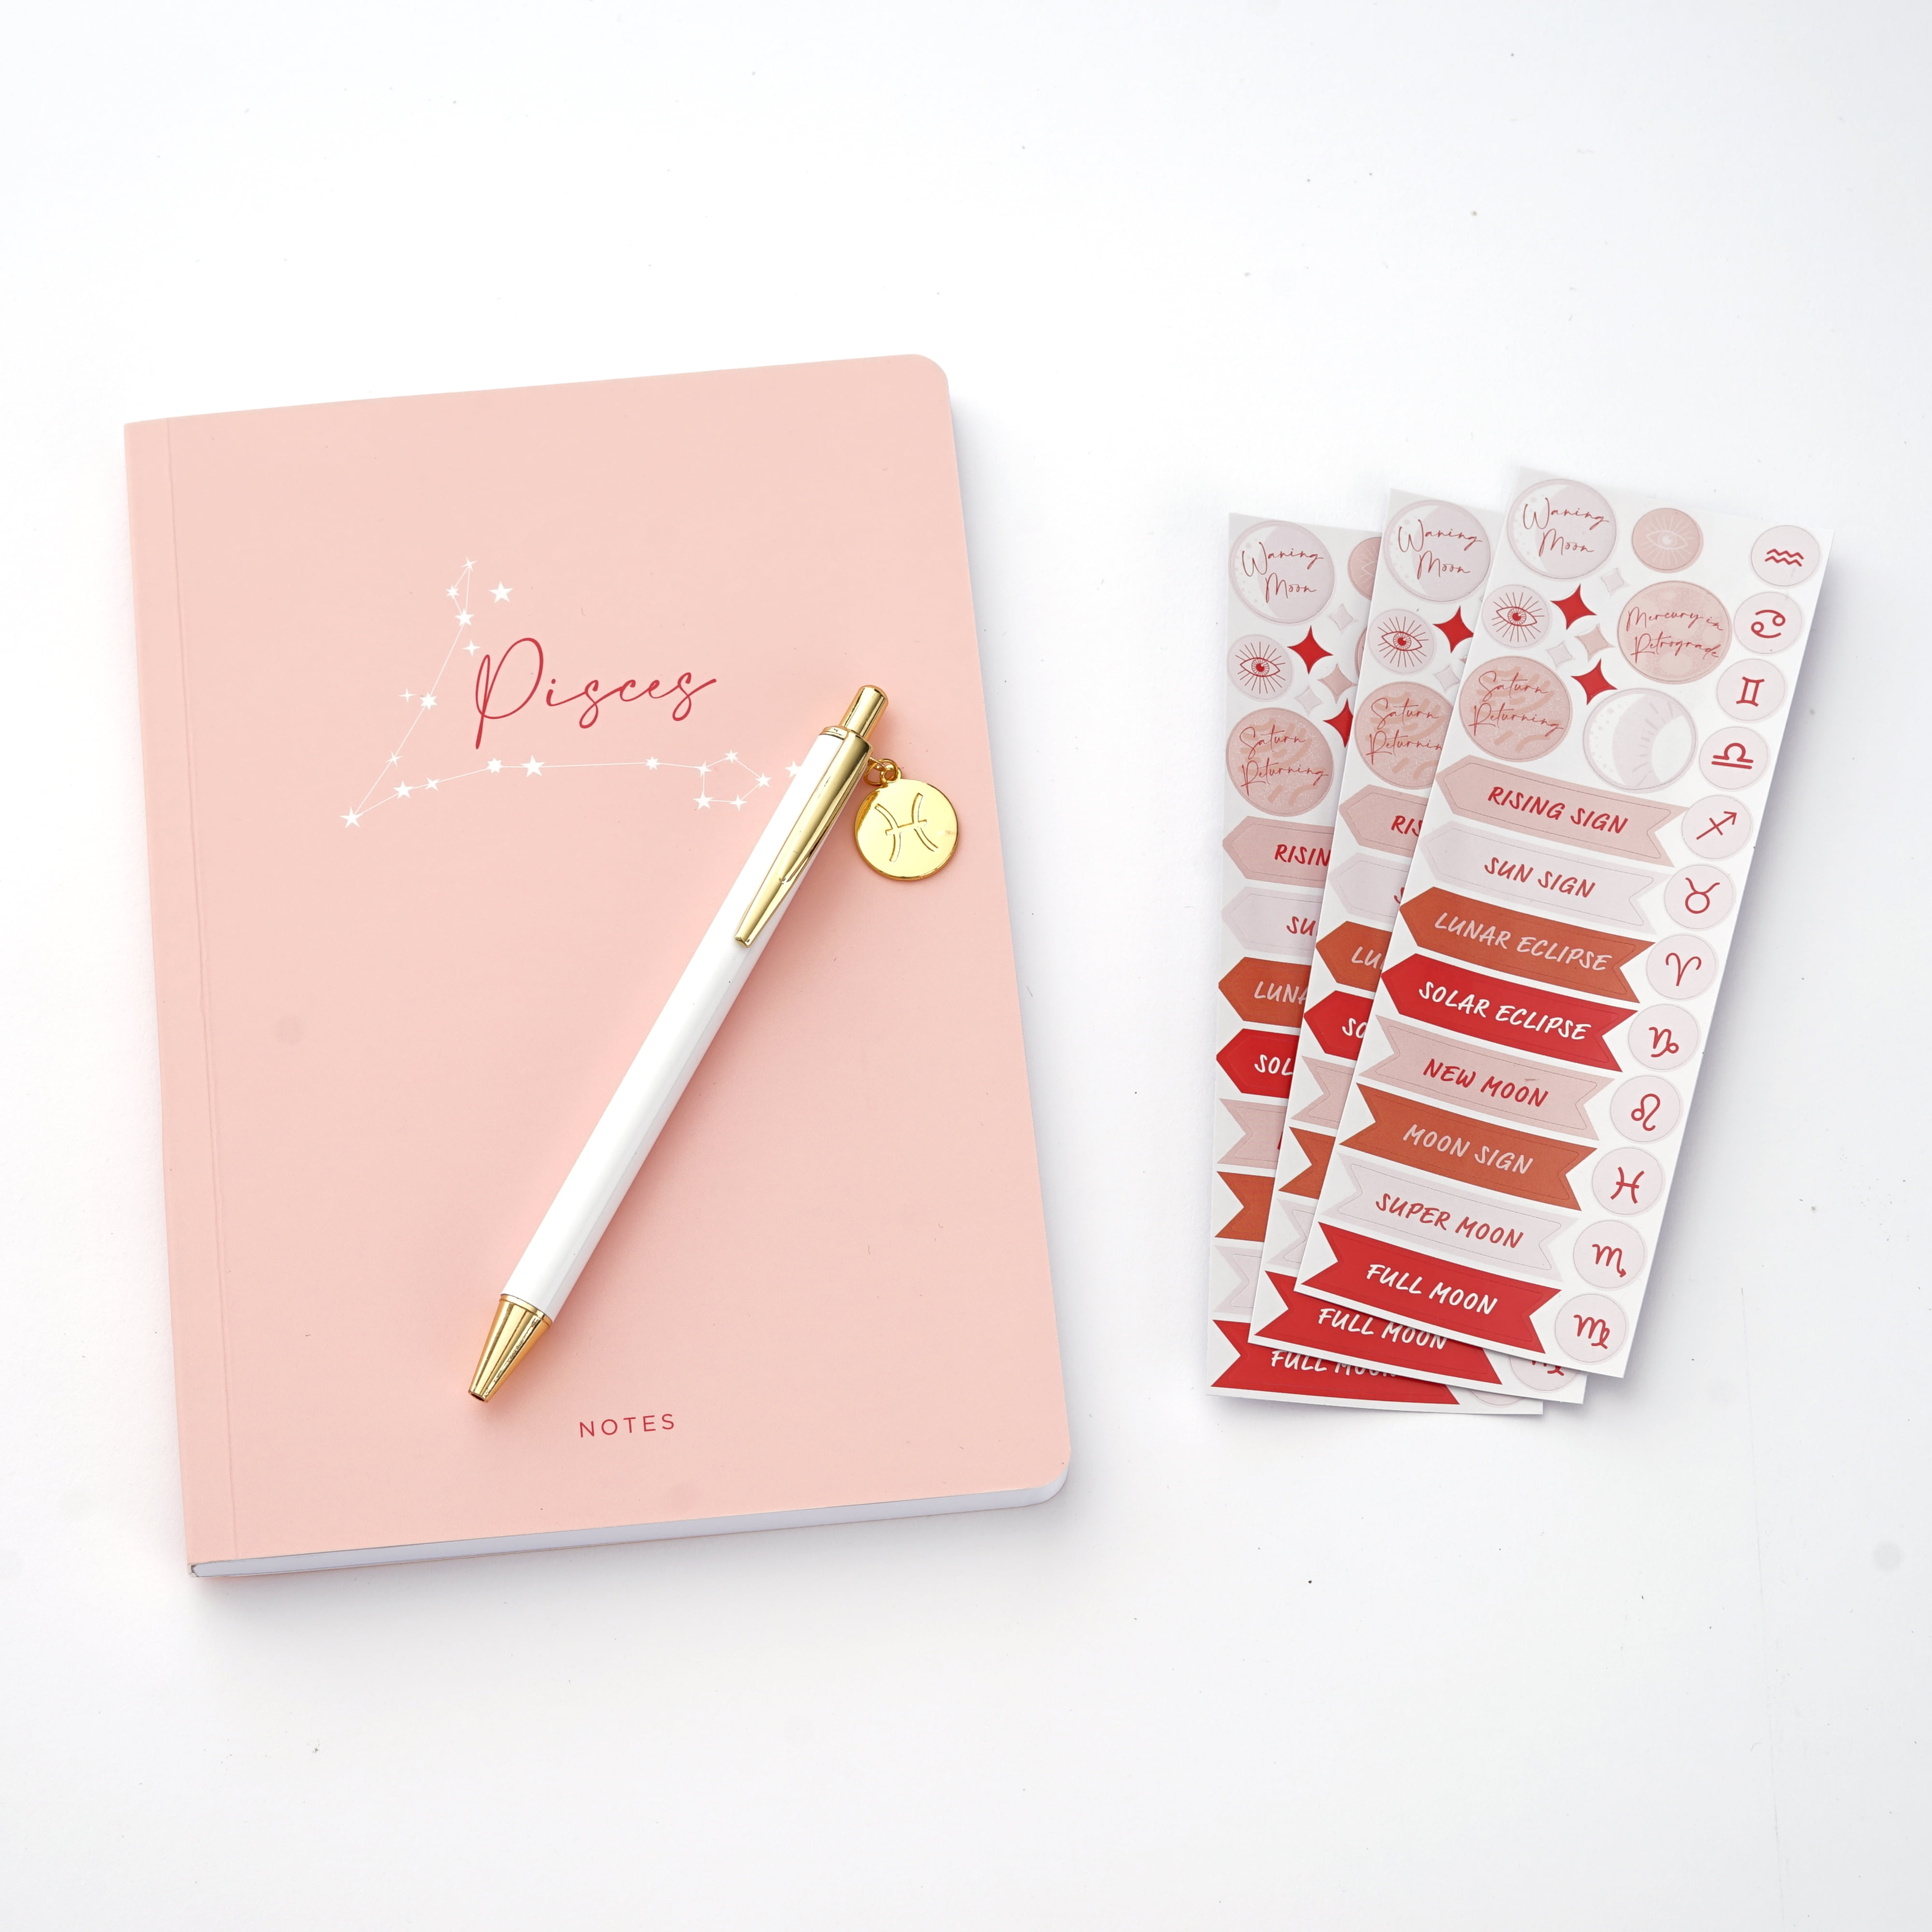 Ladies Pen & Journal Set-PINK REFILLABLE with CRYSTALS & MATCHING POUCH in a BOX 